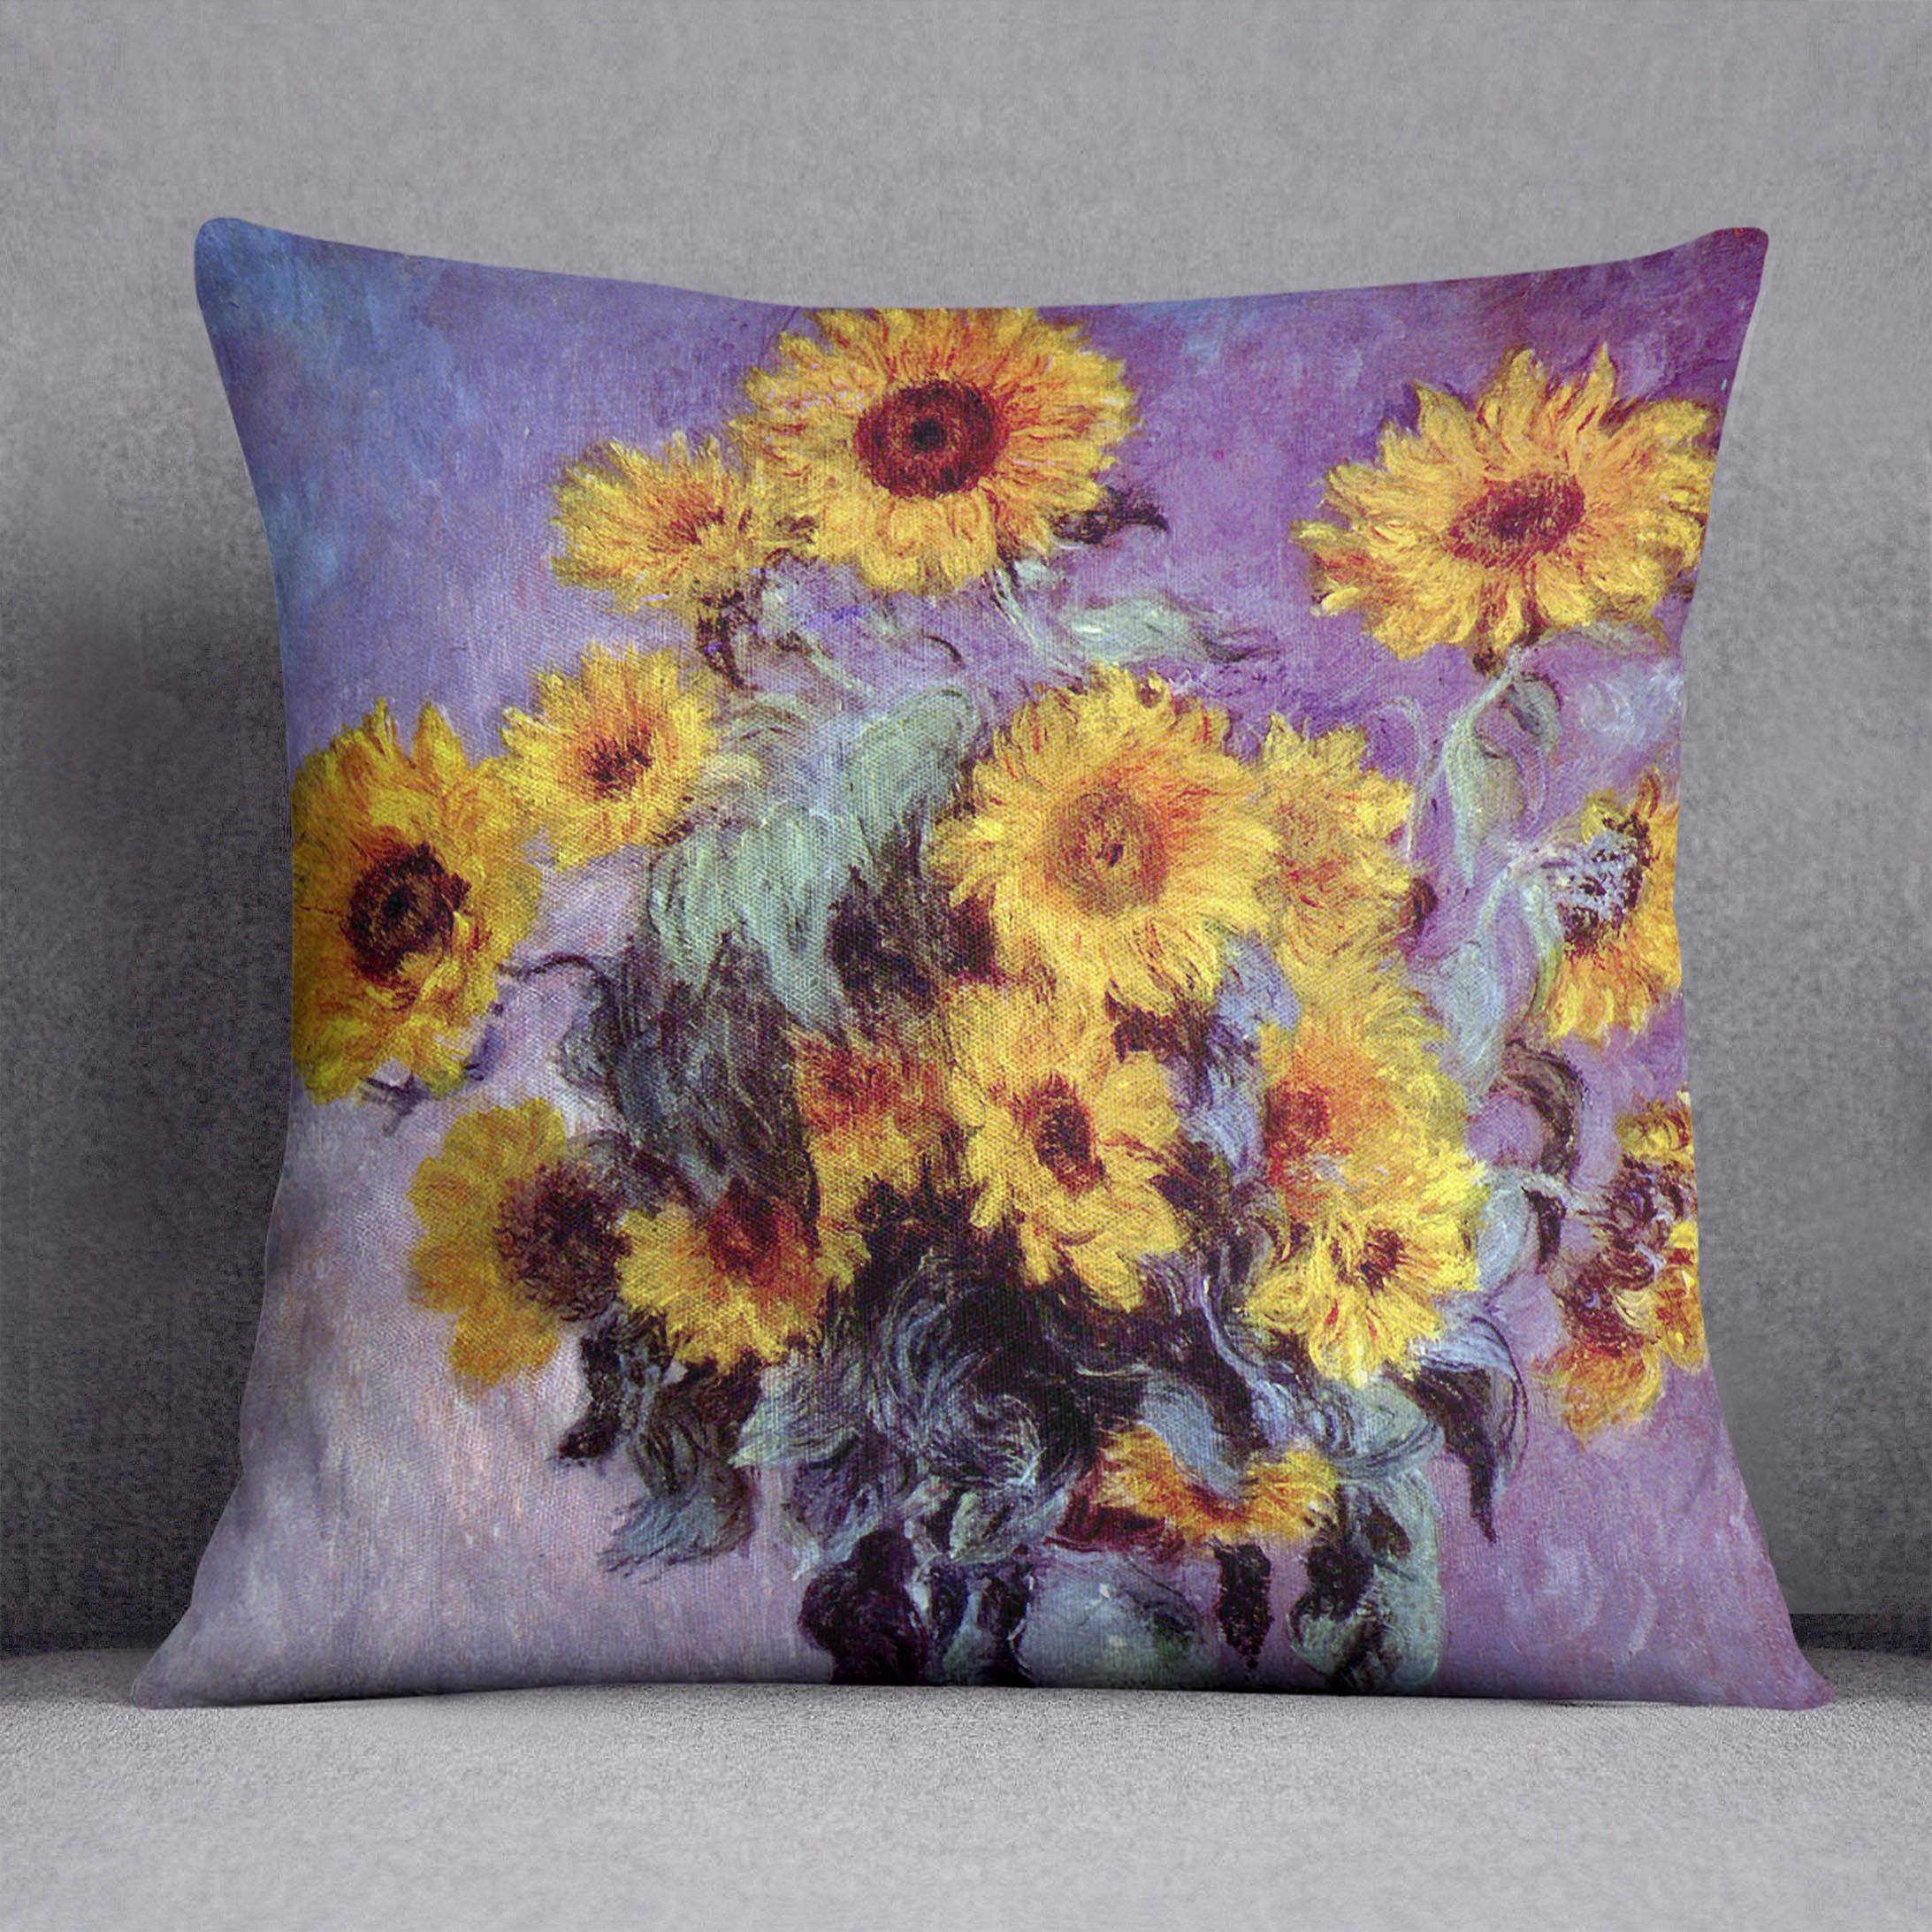 Still Life with Sunflowers by Monet Cushion